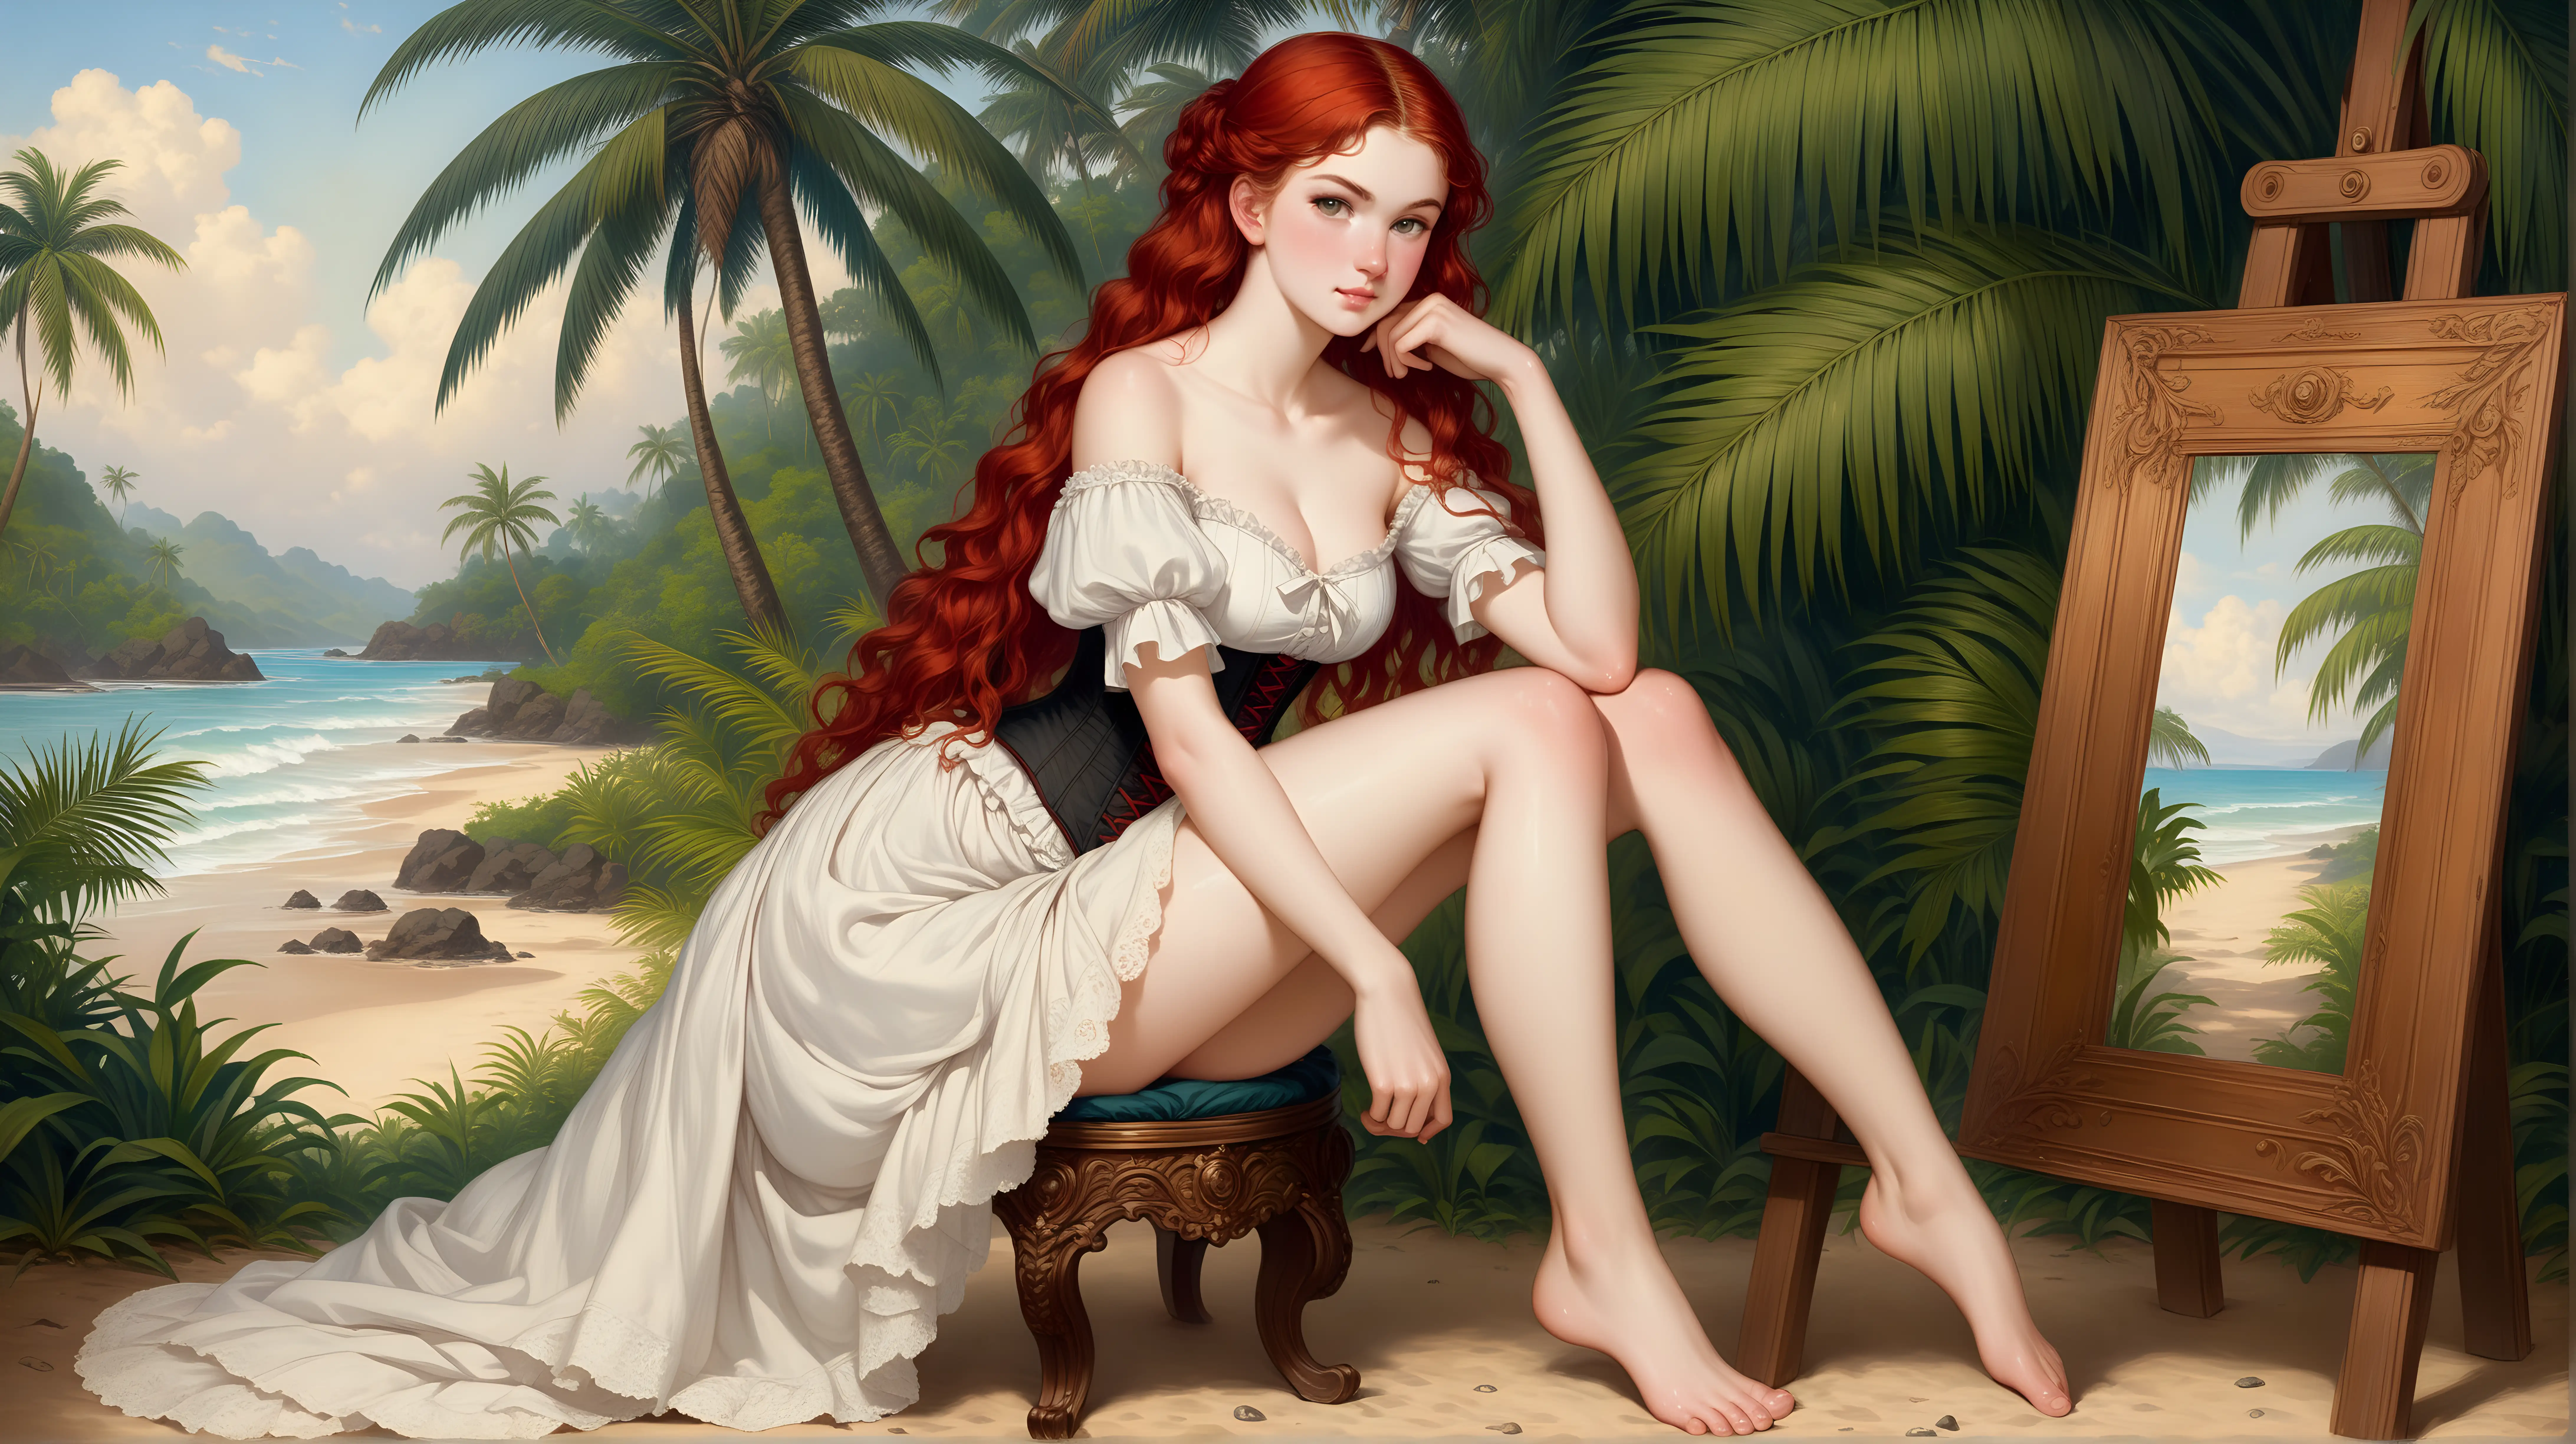 1880s British Wife in the Tropics Curly Red Hair and Bare Feet Portrait